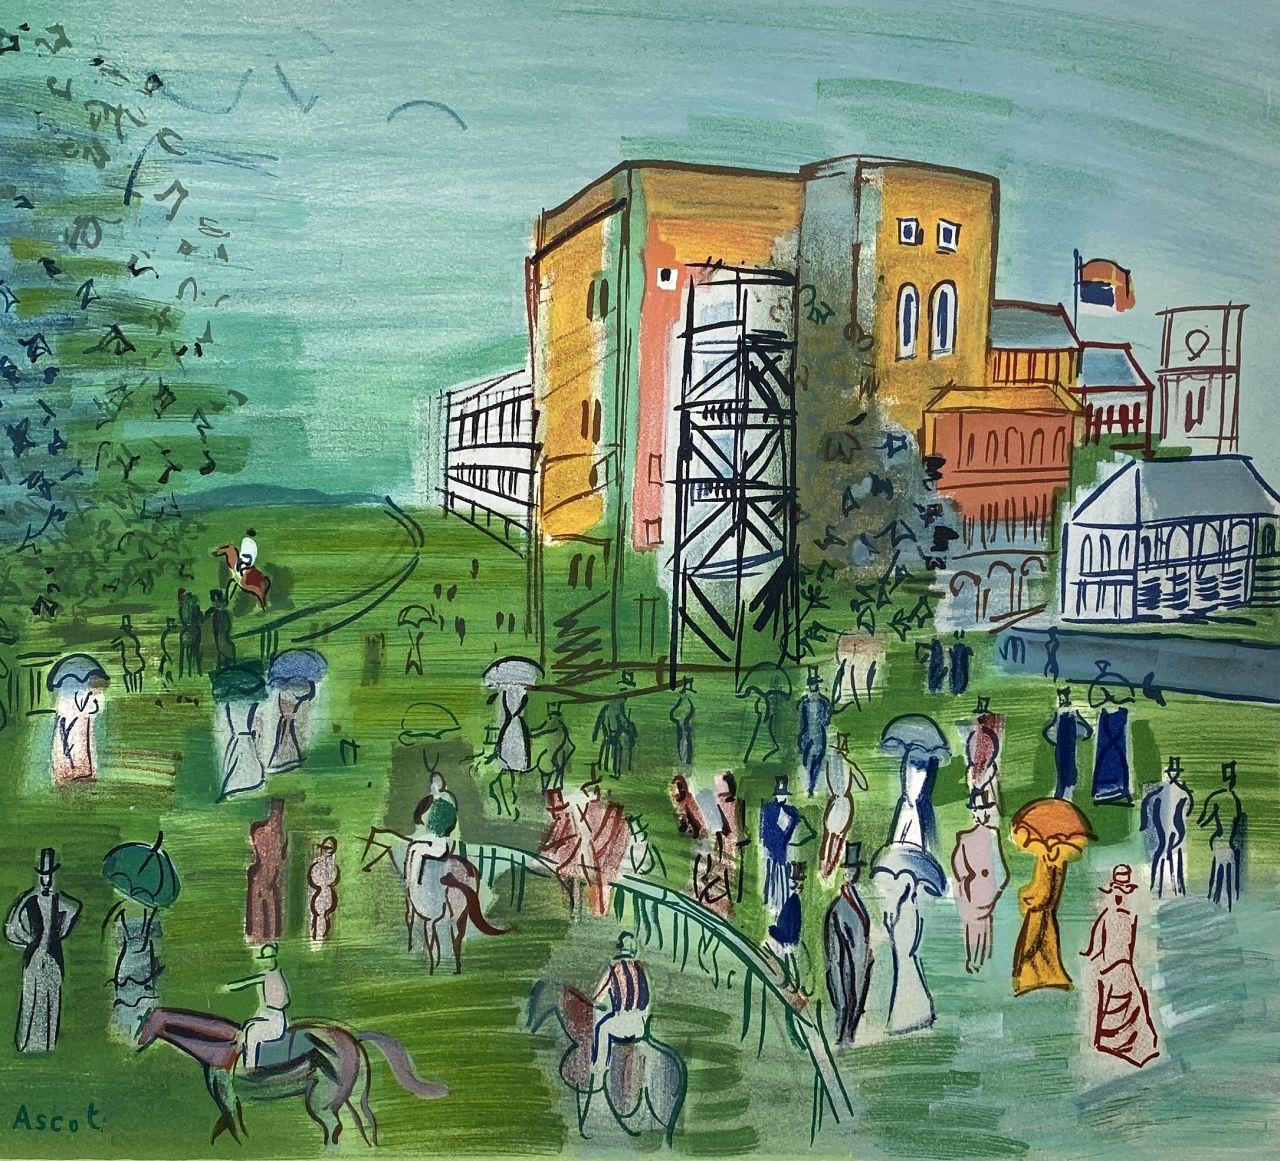 Hippodrome Ascot Racecourse - Tall Lithograph Signed in the Plate (Mourlot) - Modern Print by Raoul Dufy